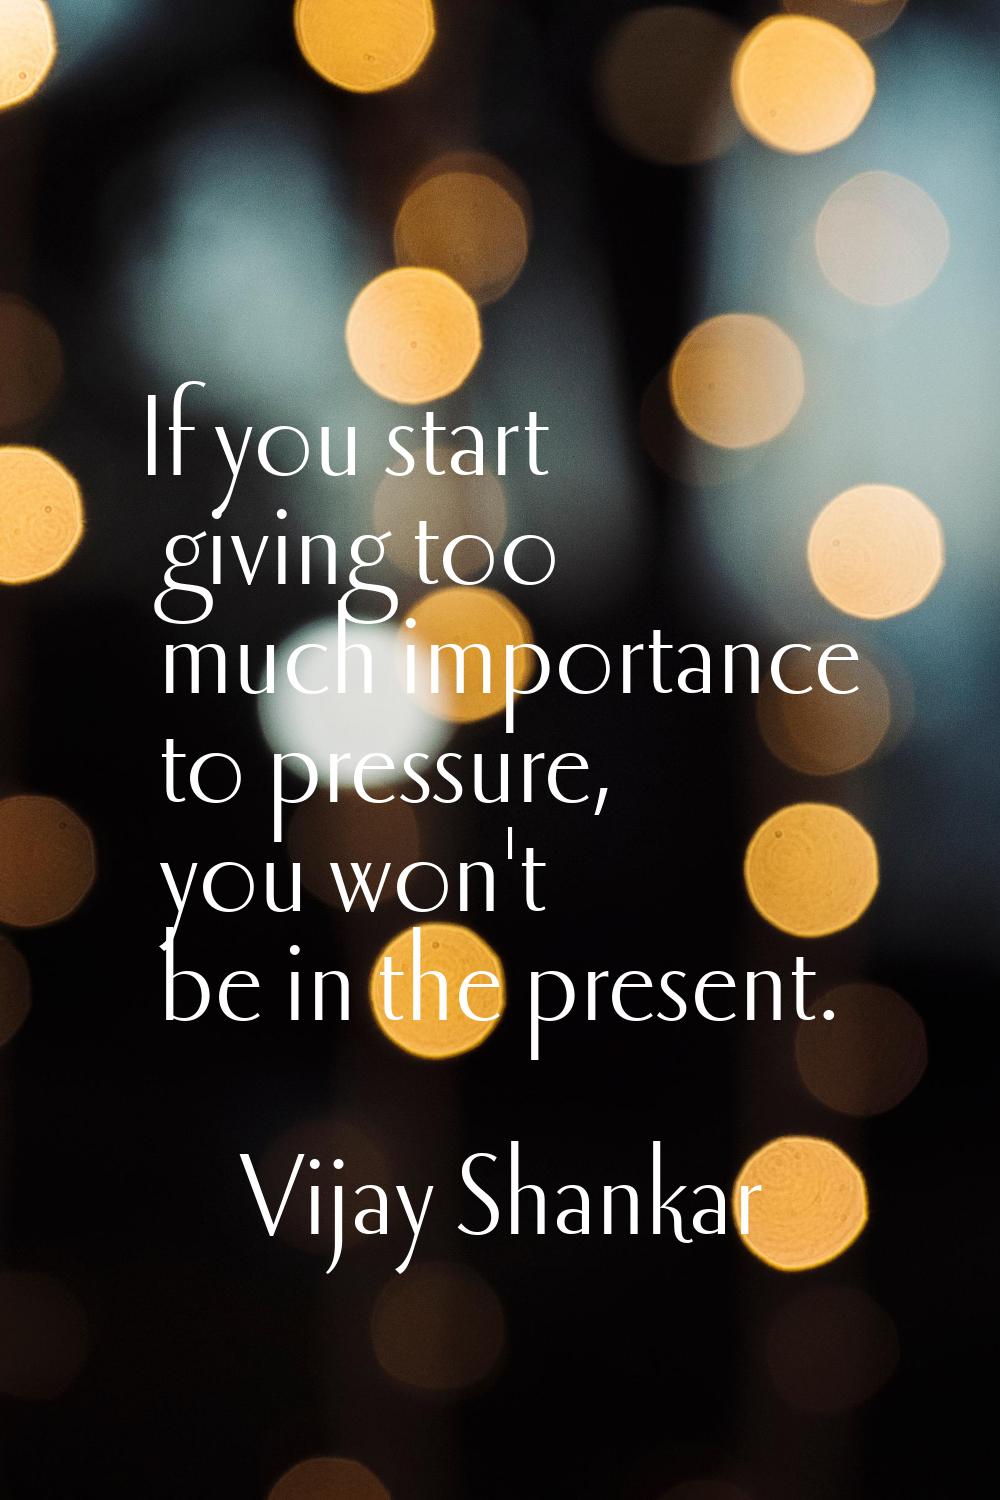 If you start giving too much importance to pressure, you won't be in the present.